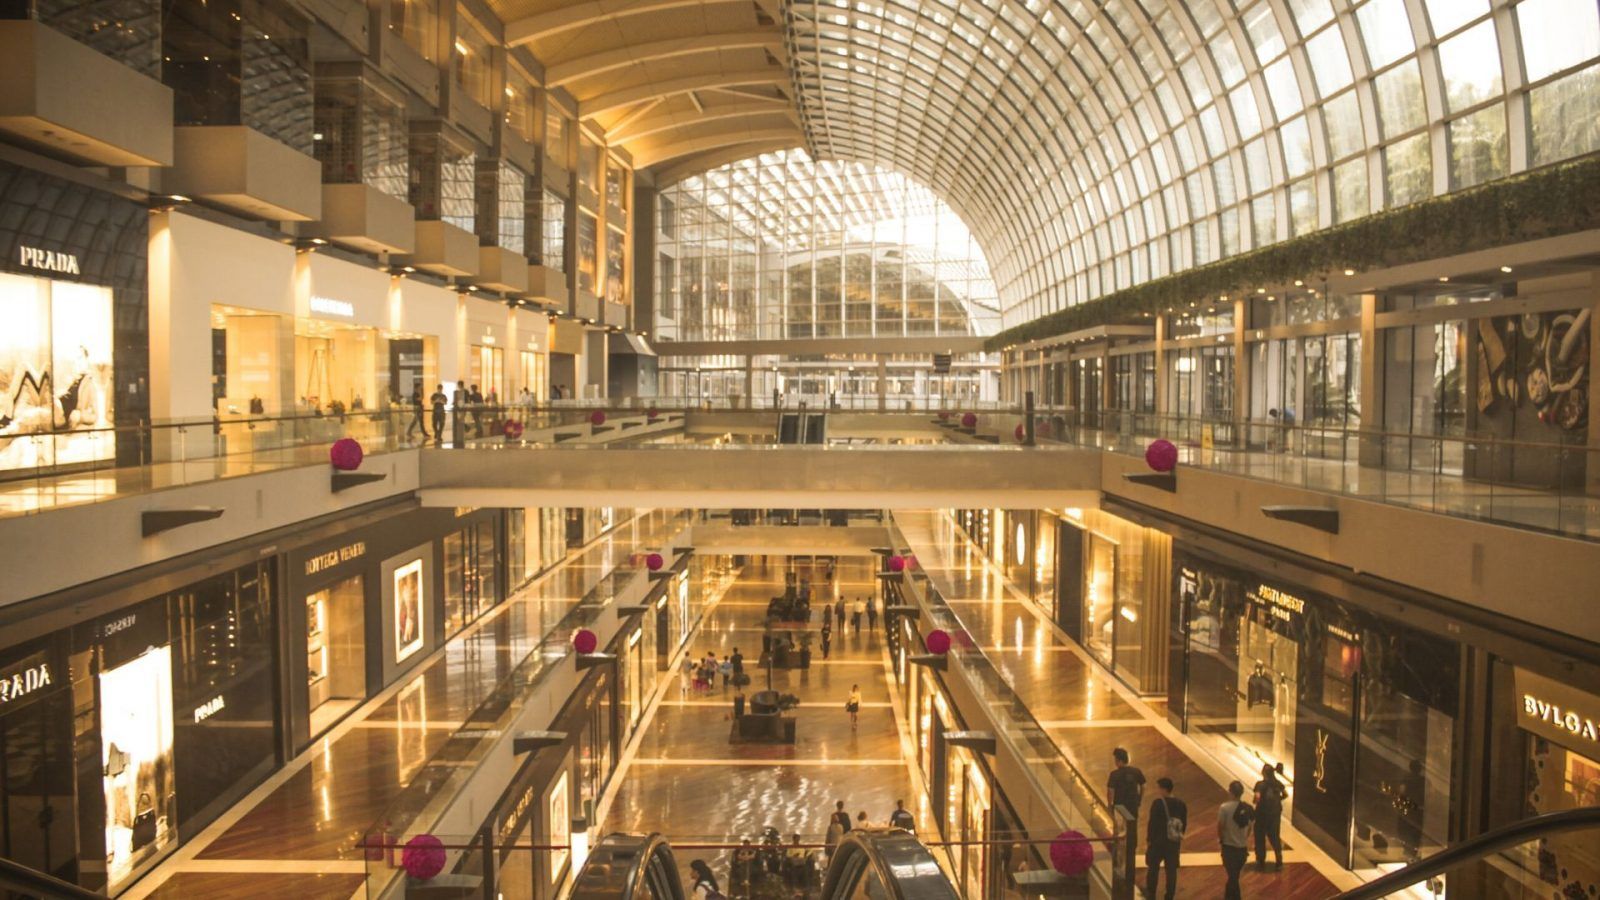 Check out these luxury shopping malls in India for premium brands